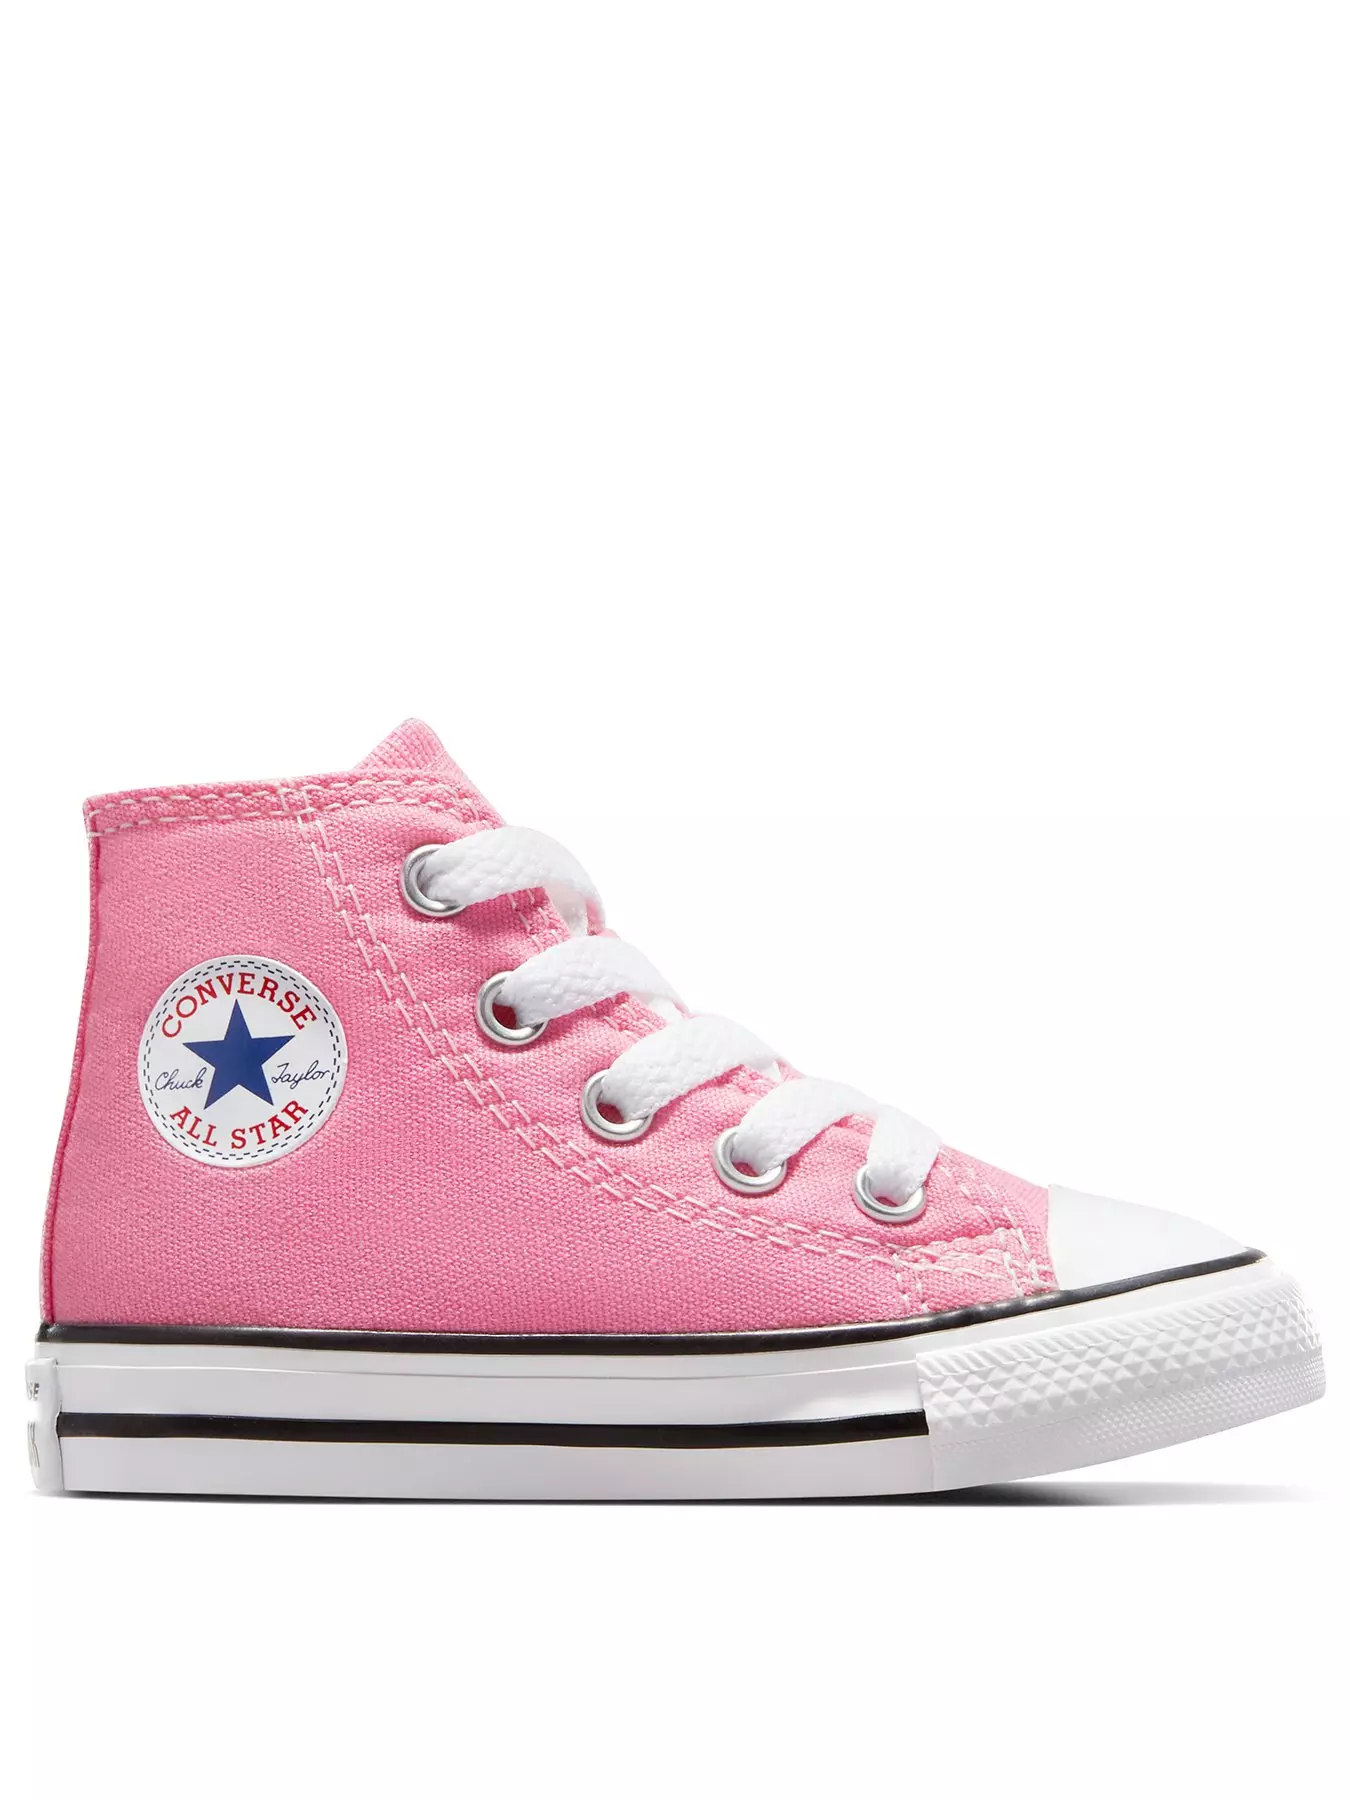 Kids Converse | Baby Converse | Infants | Very